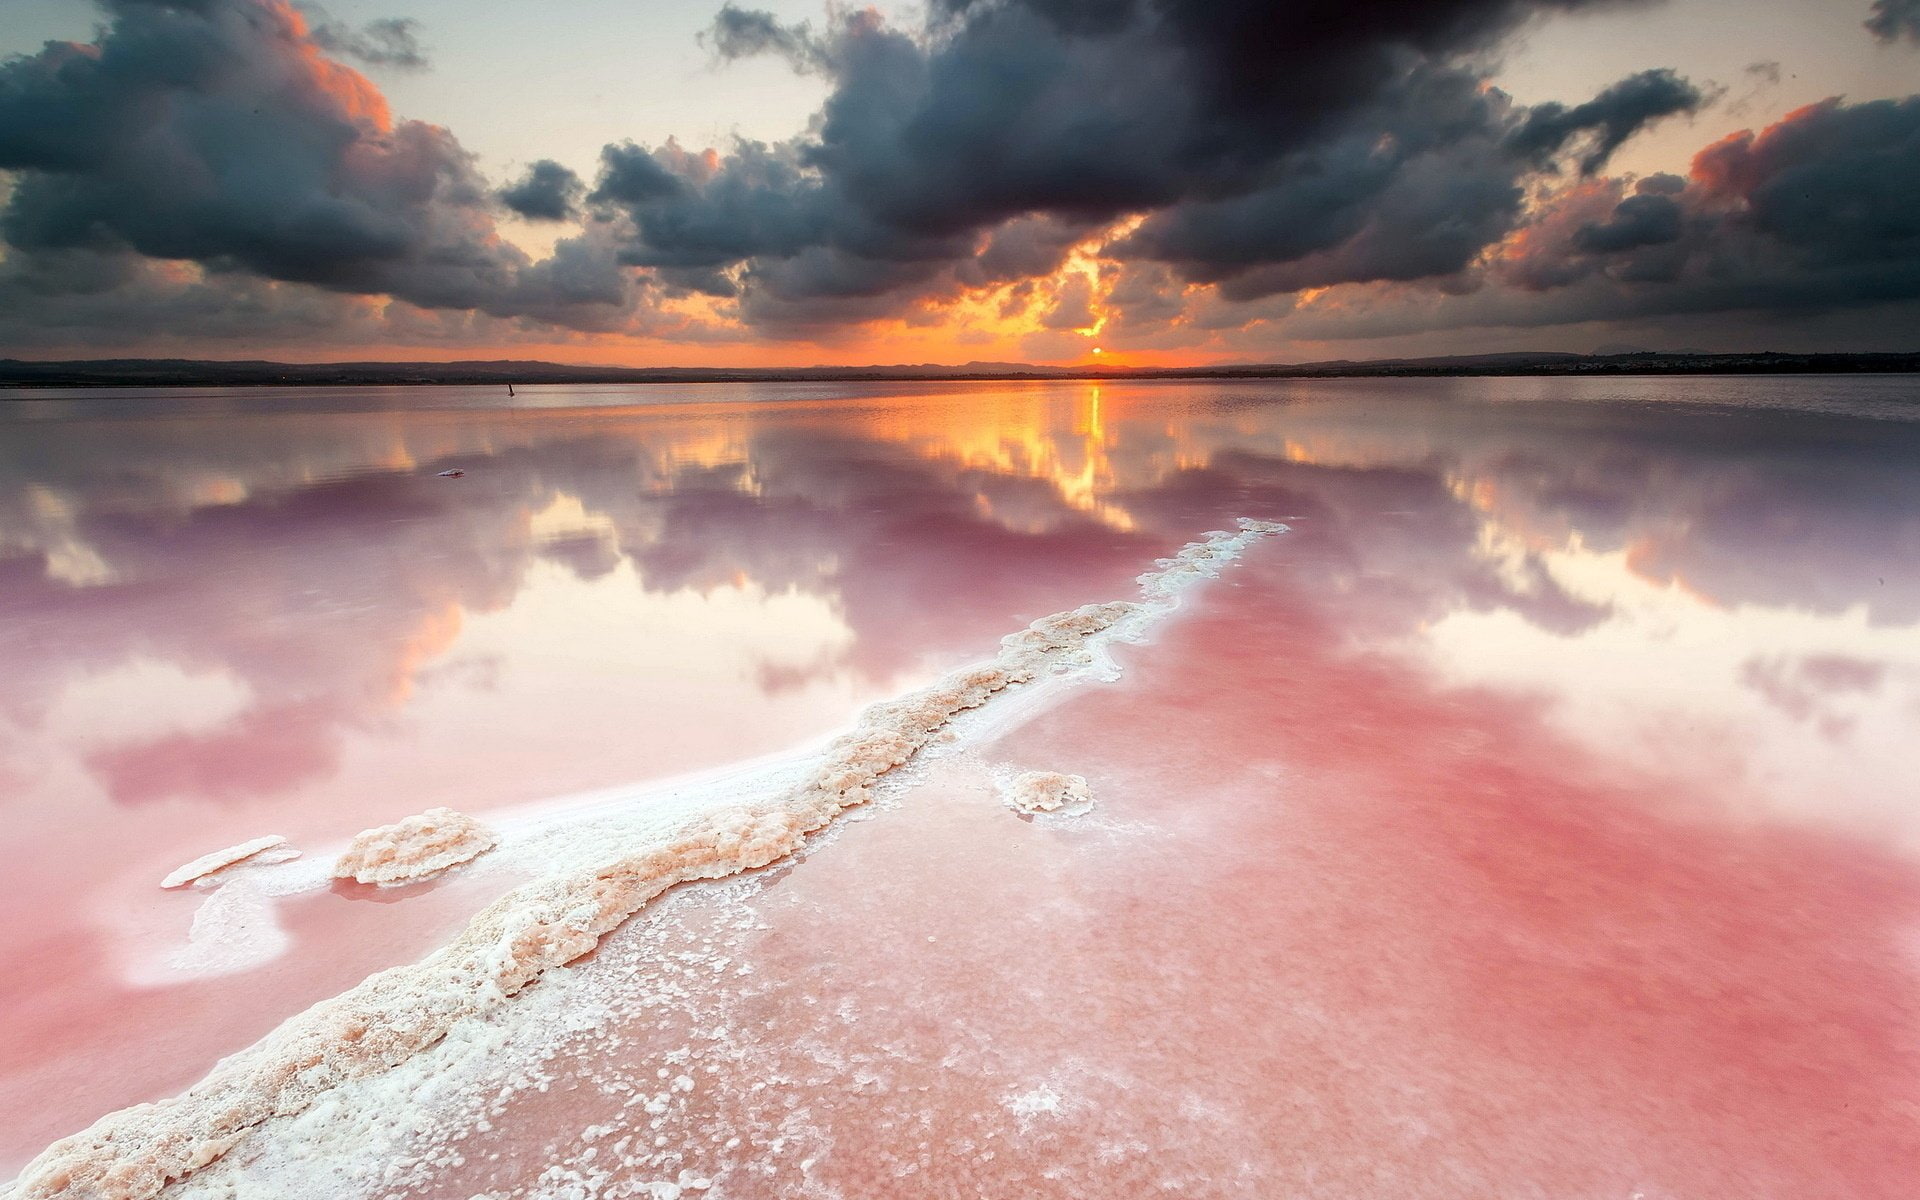 Earth, Reflection, Beach, Pastel, Sunset, water, cloud - sky